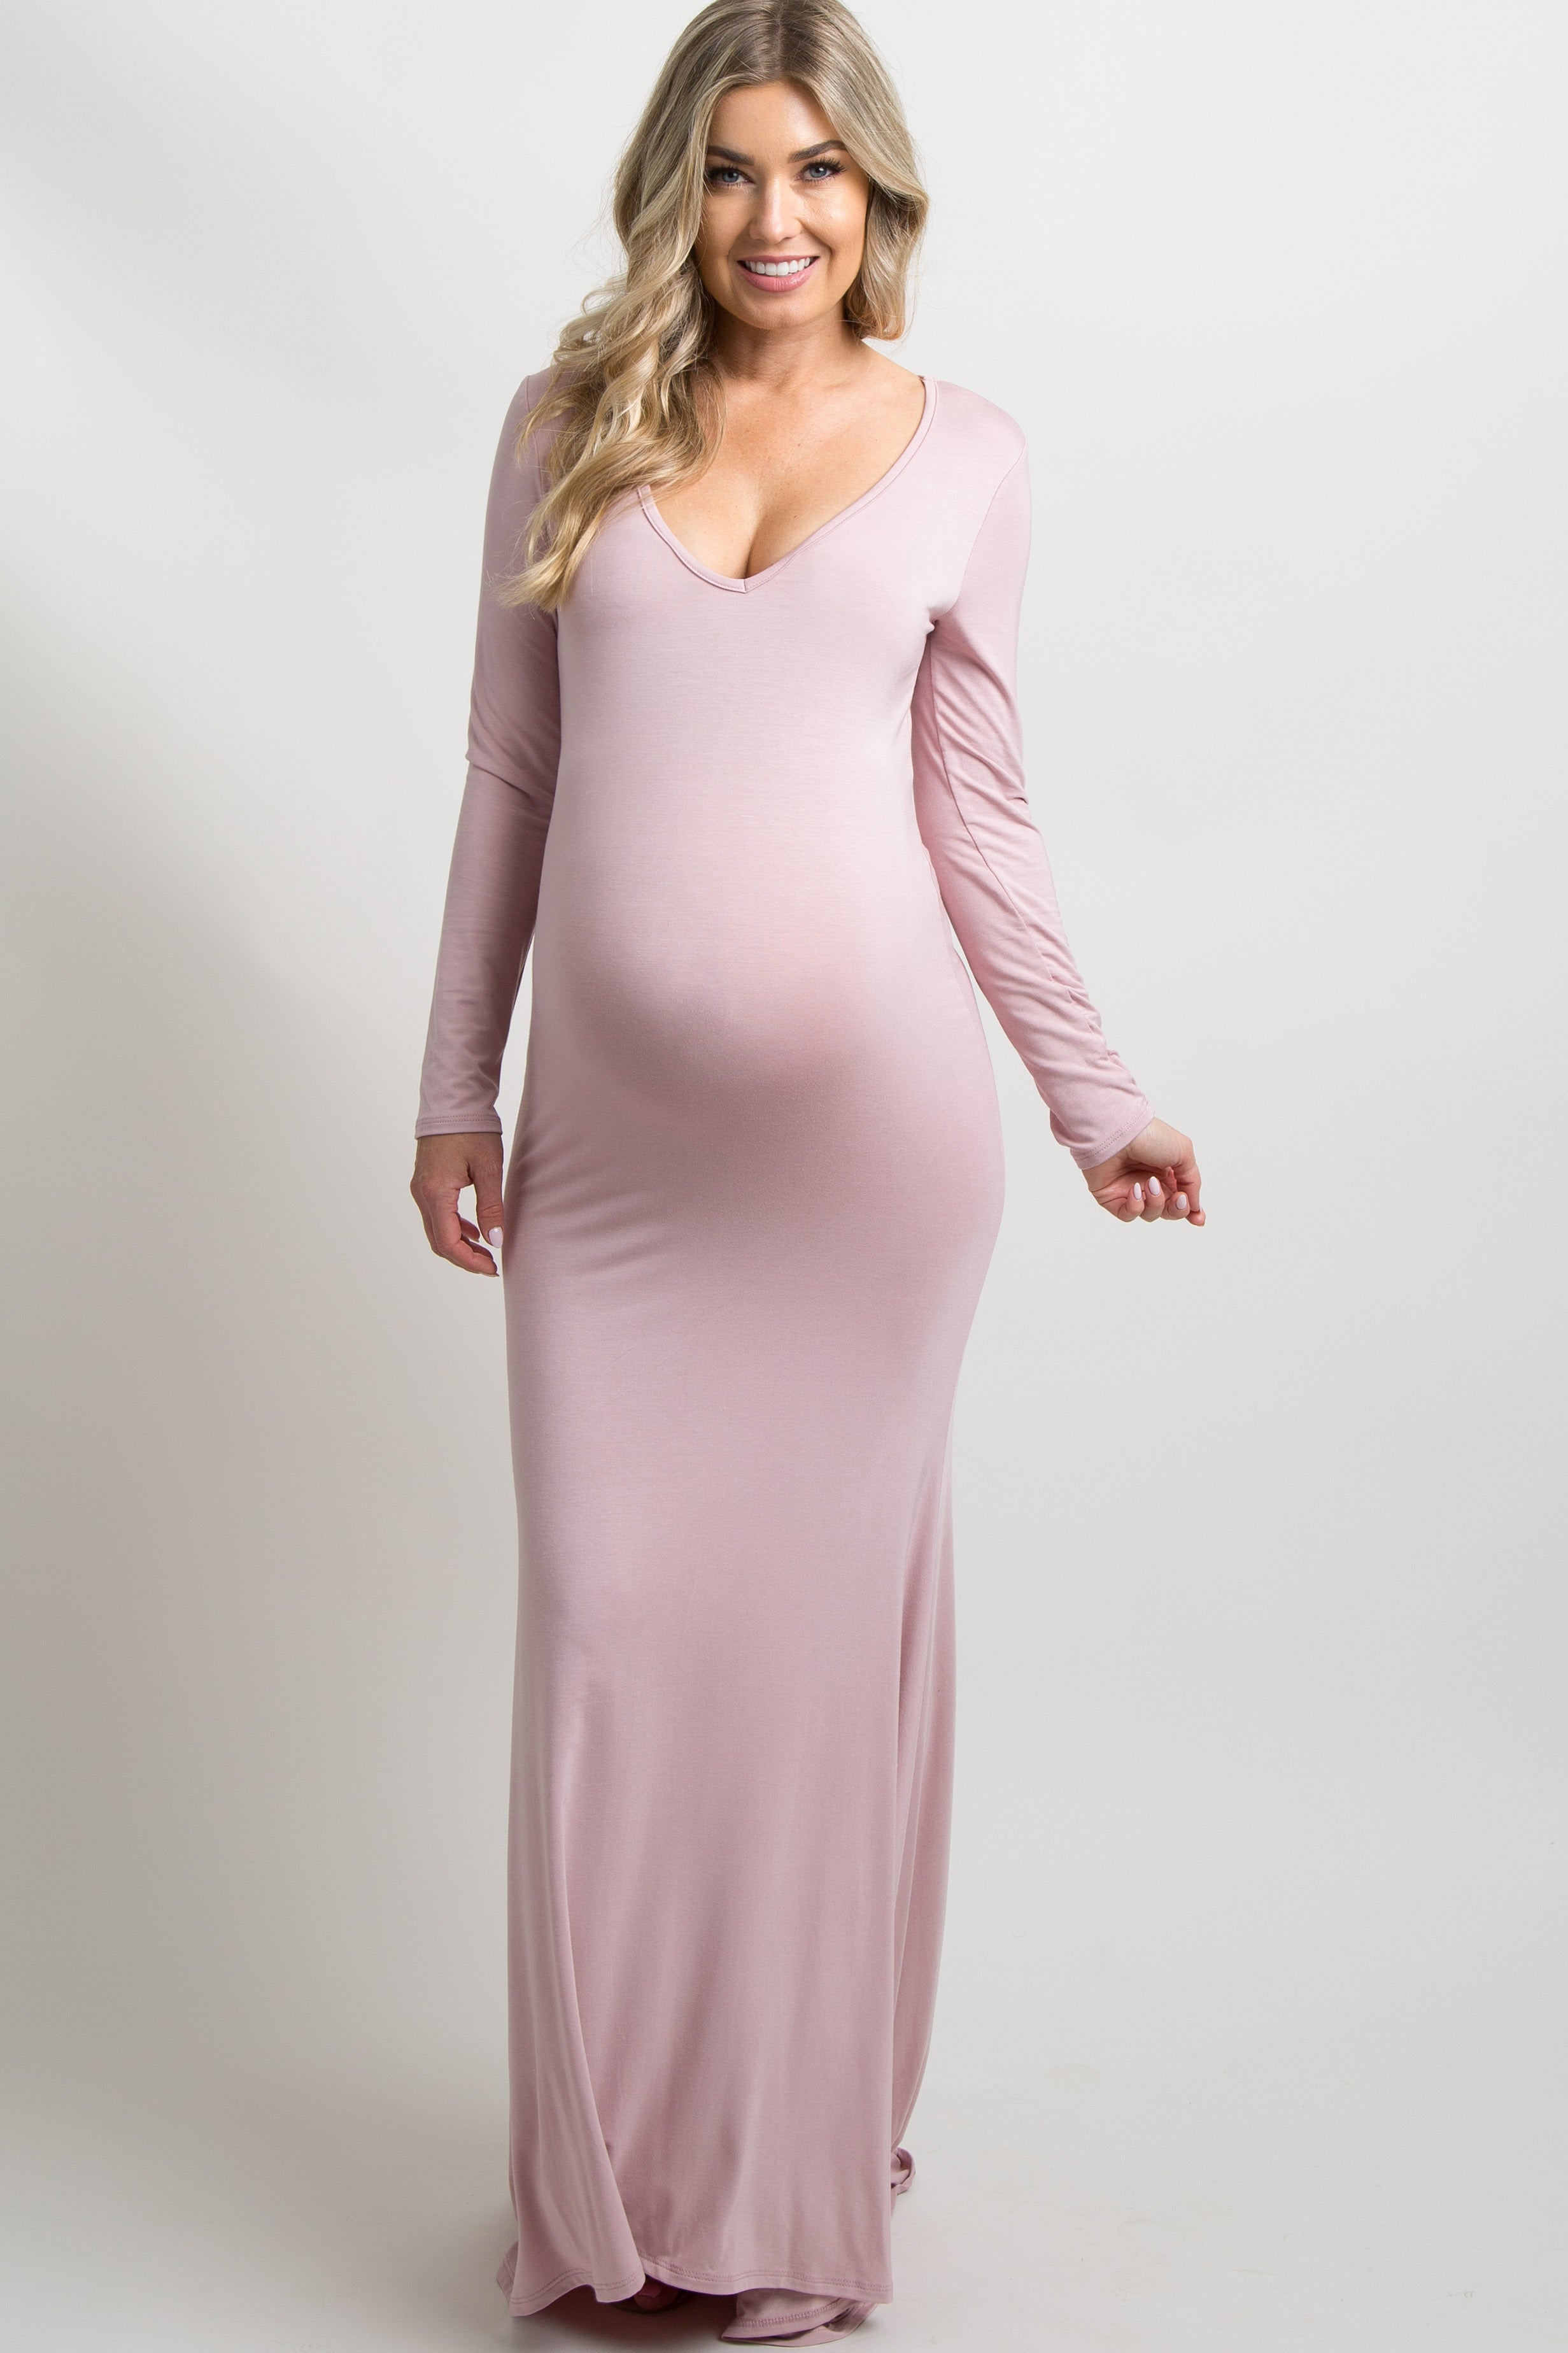 MY FIRST IMPRESSIONS & REVIEW - PINKBLUSH MATERNITY TRY-ON DRESS